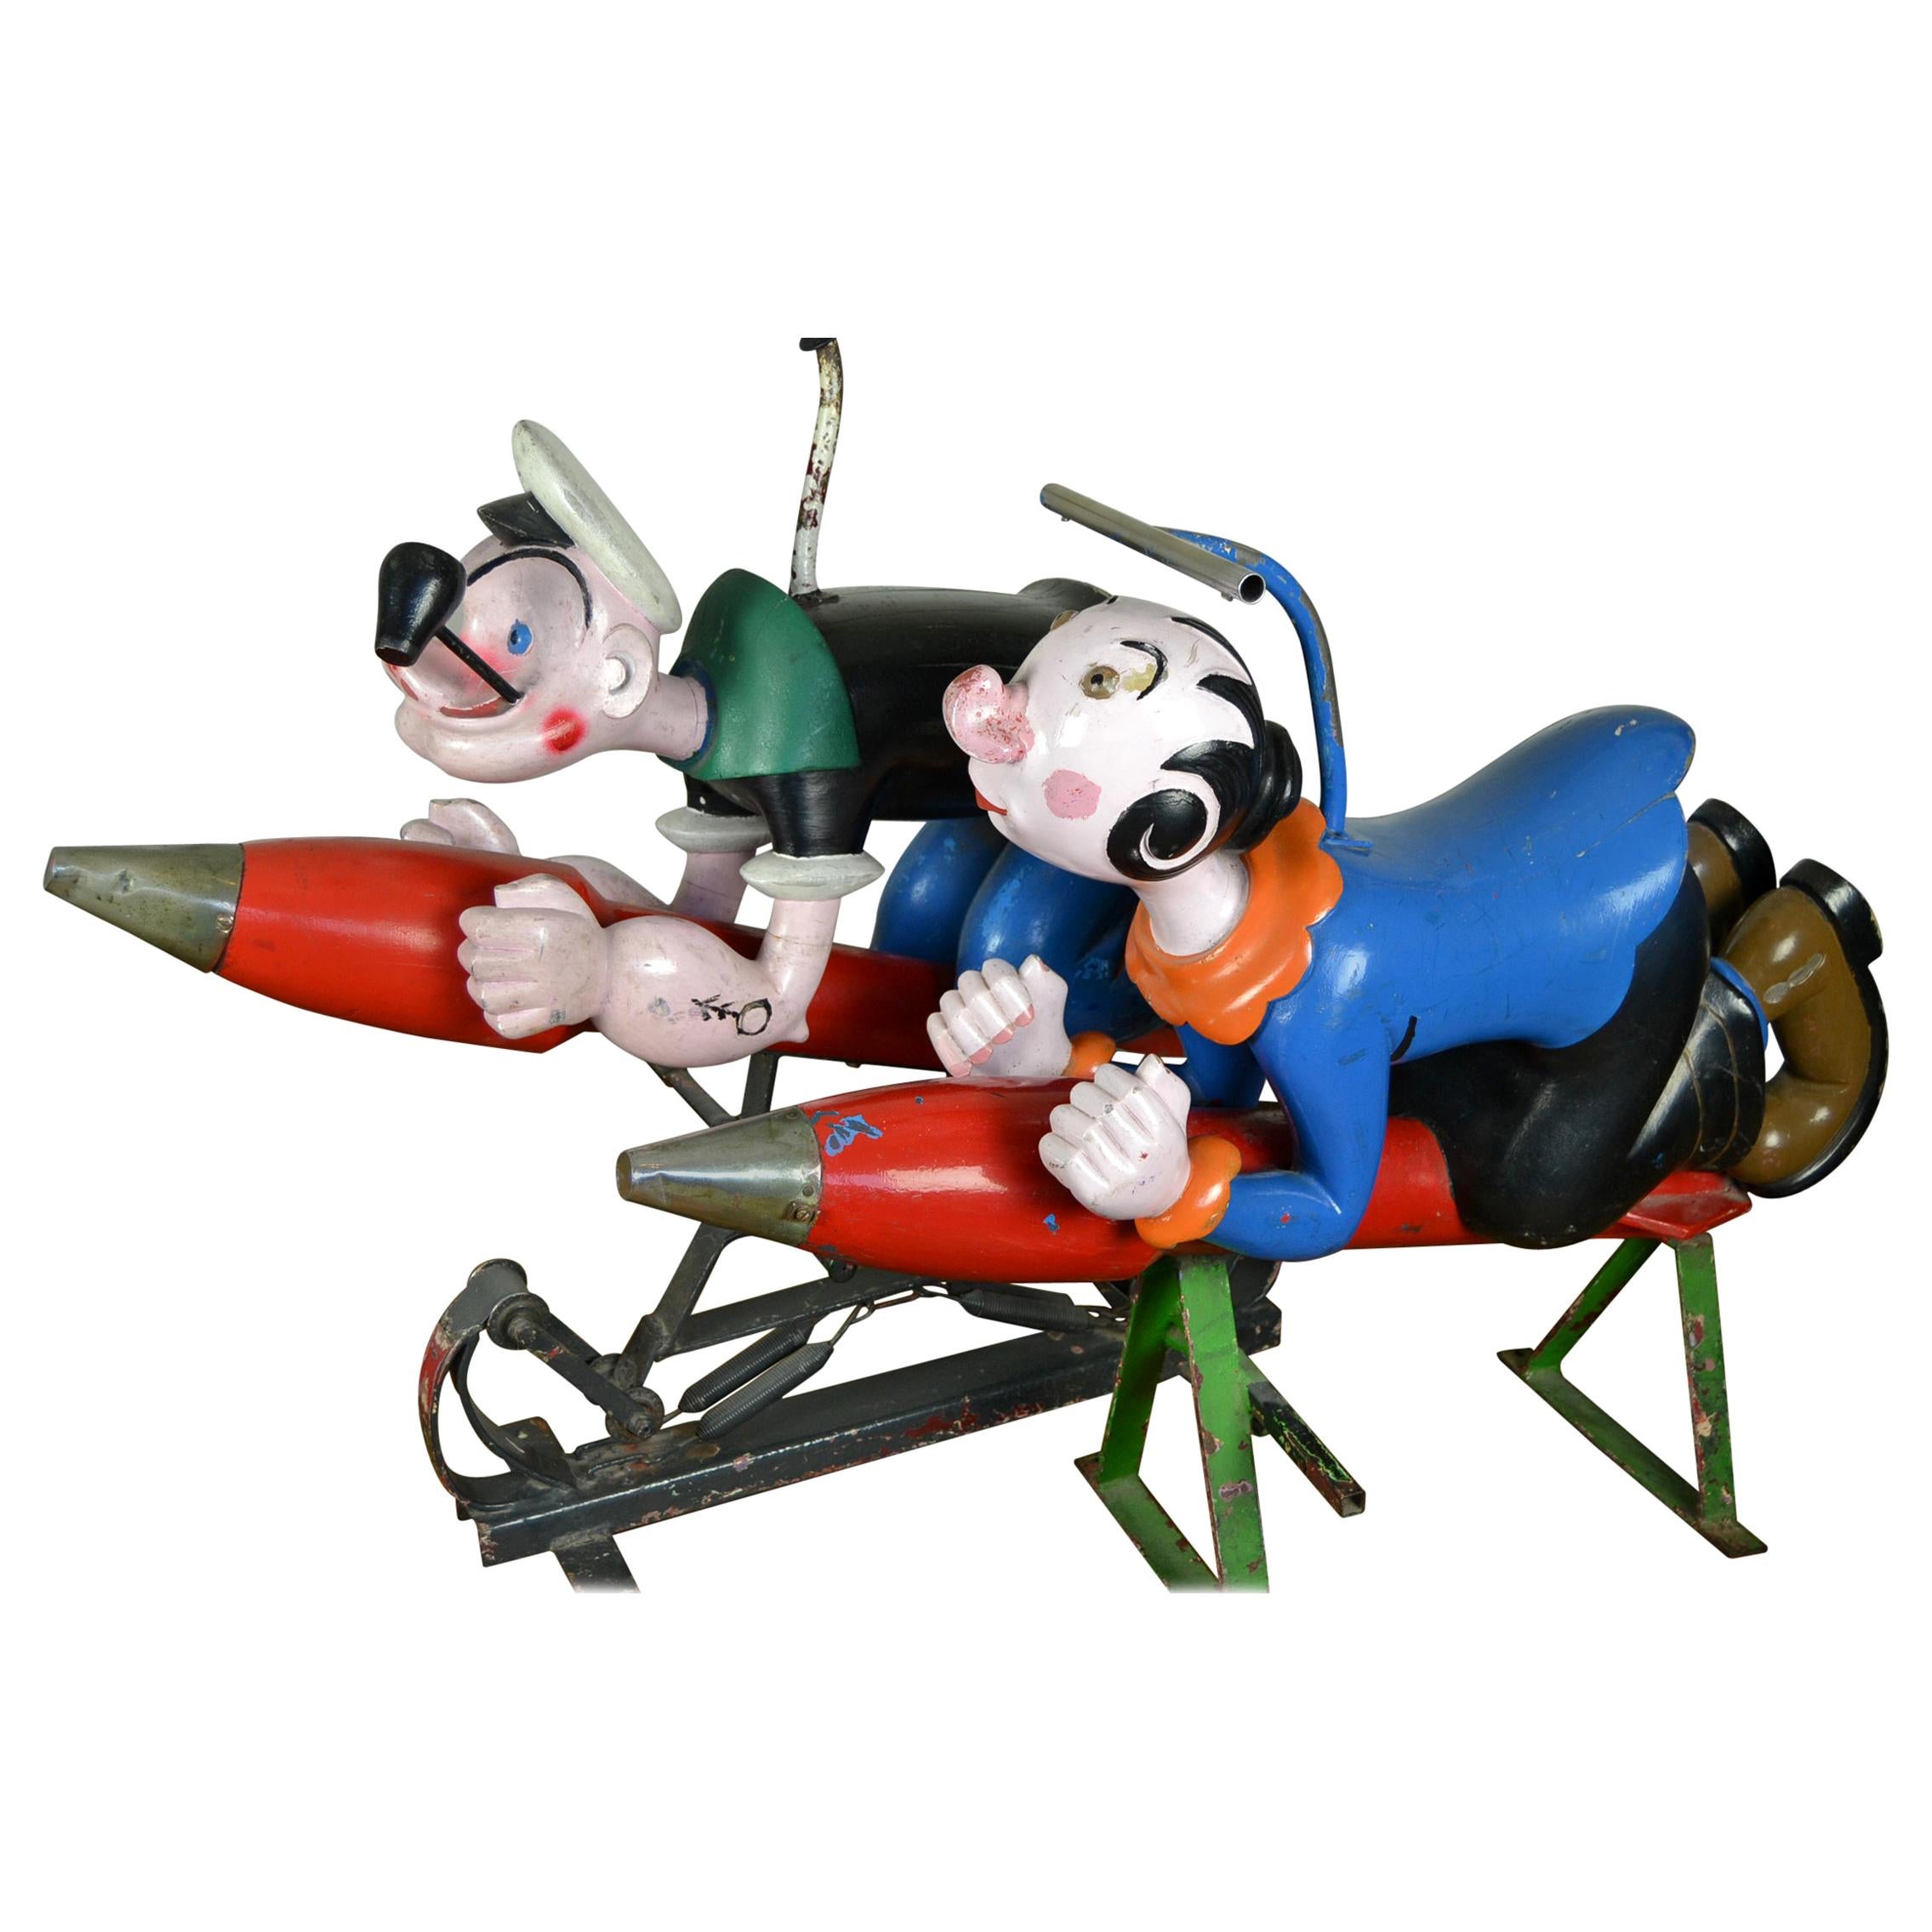 Wooden Popey and Olive Oyl Carousel Sculptures by Bernard Kindt, Belgium , 1950s